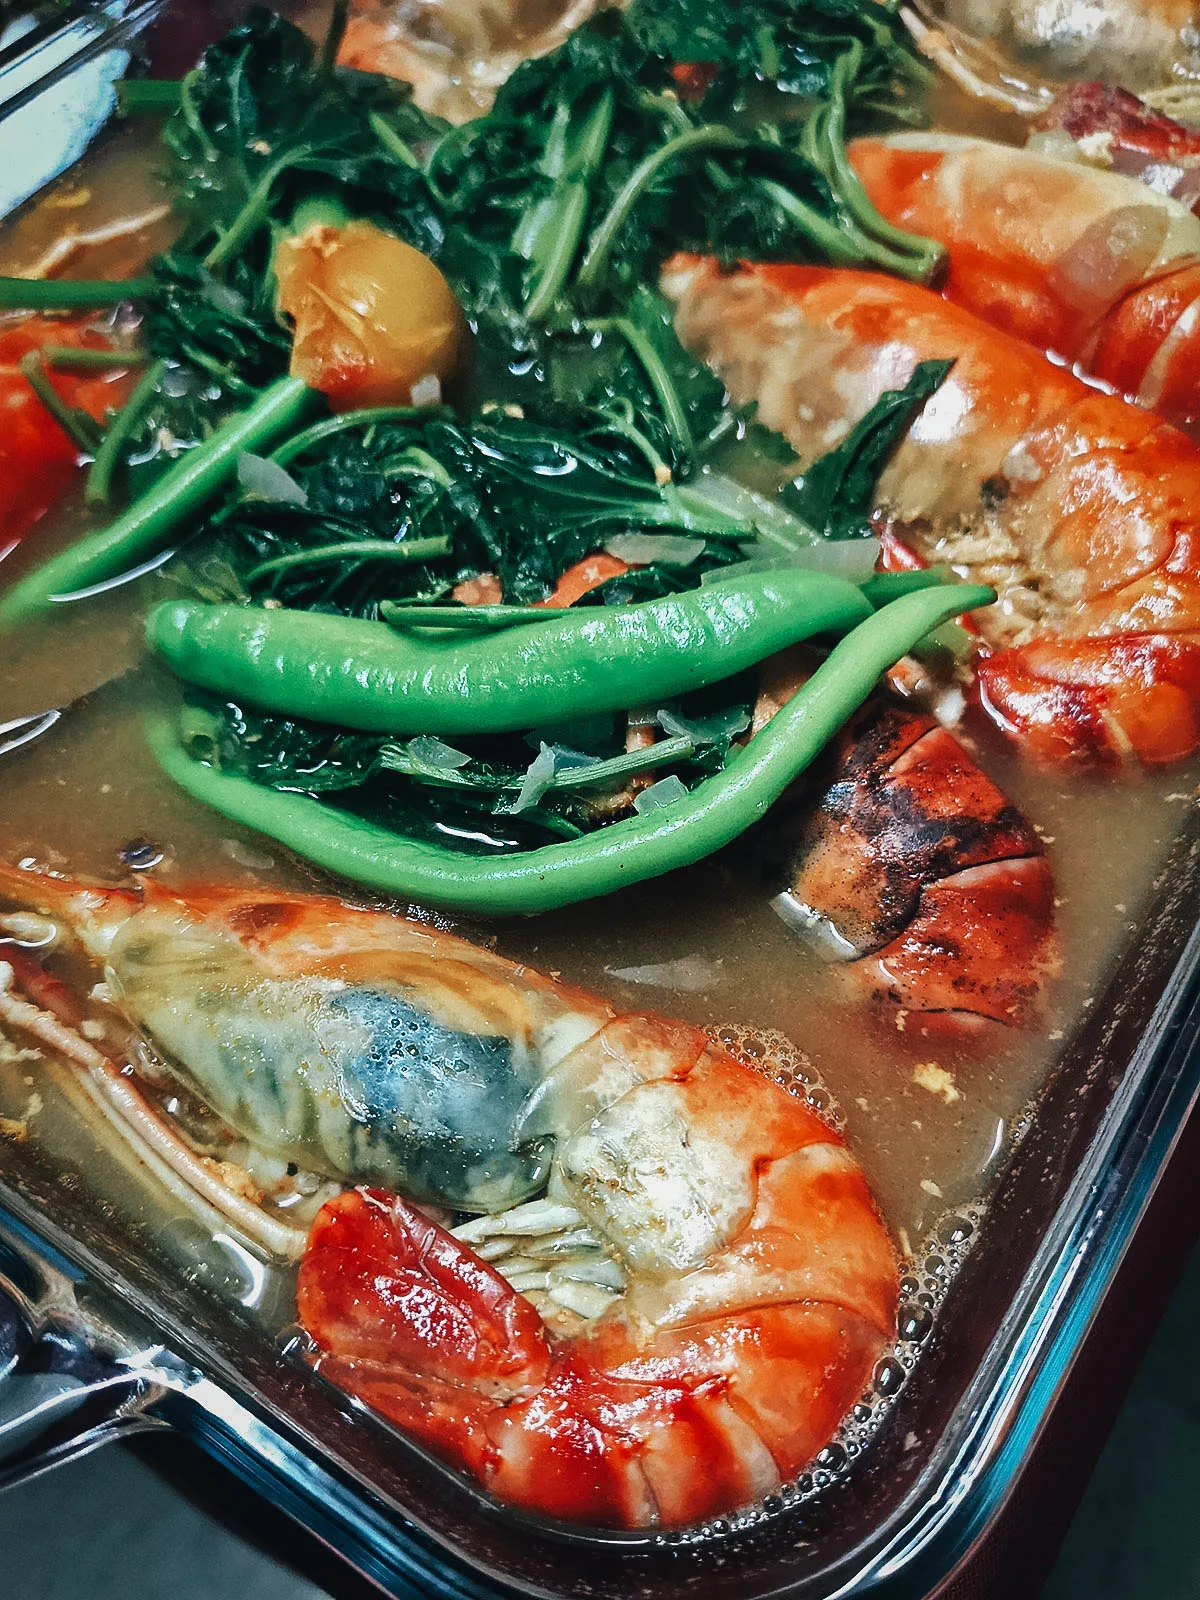 Sinigang na hipon, a type of sinigang made with shrimp